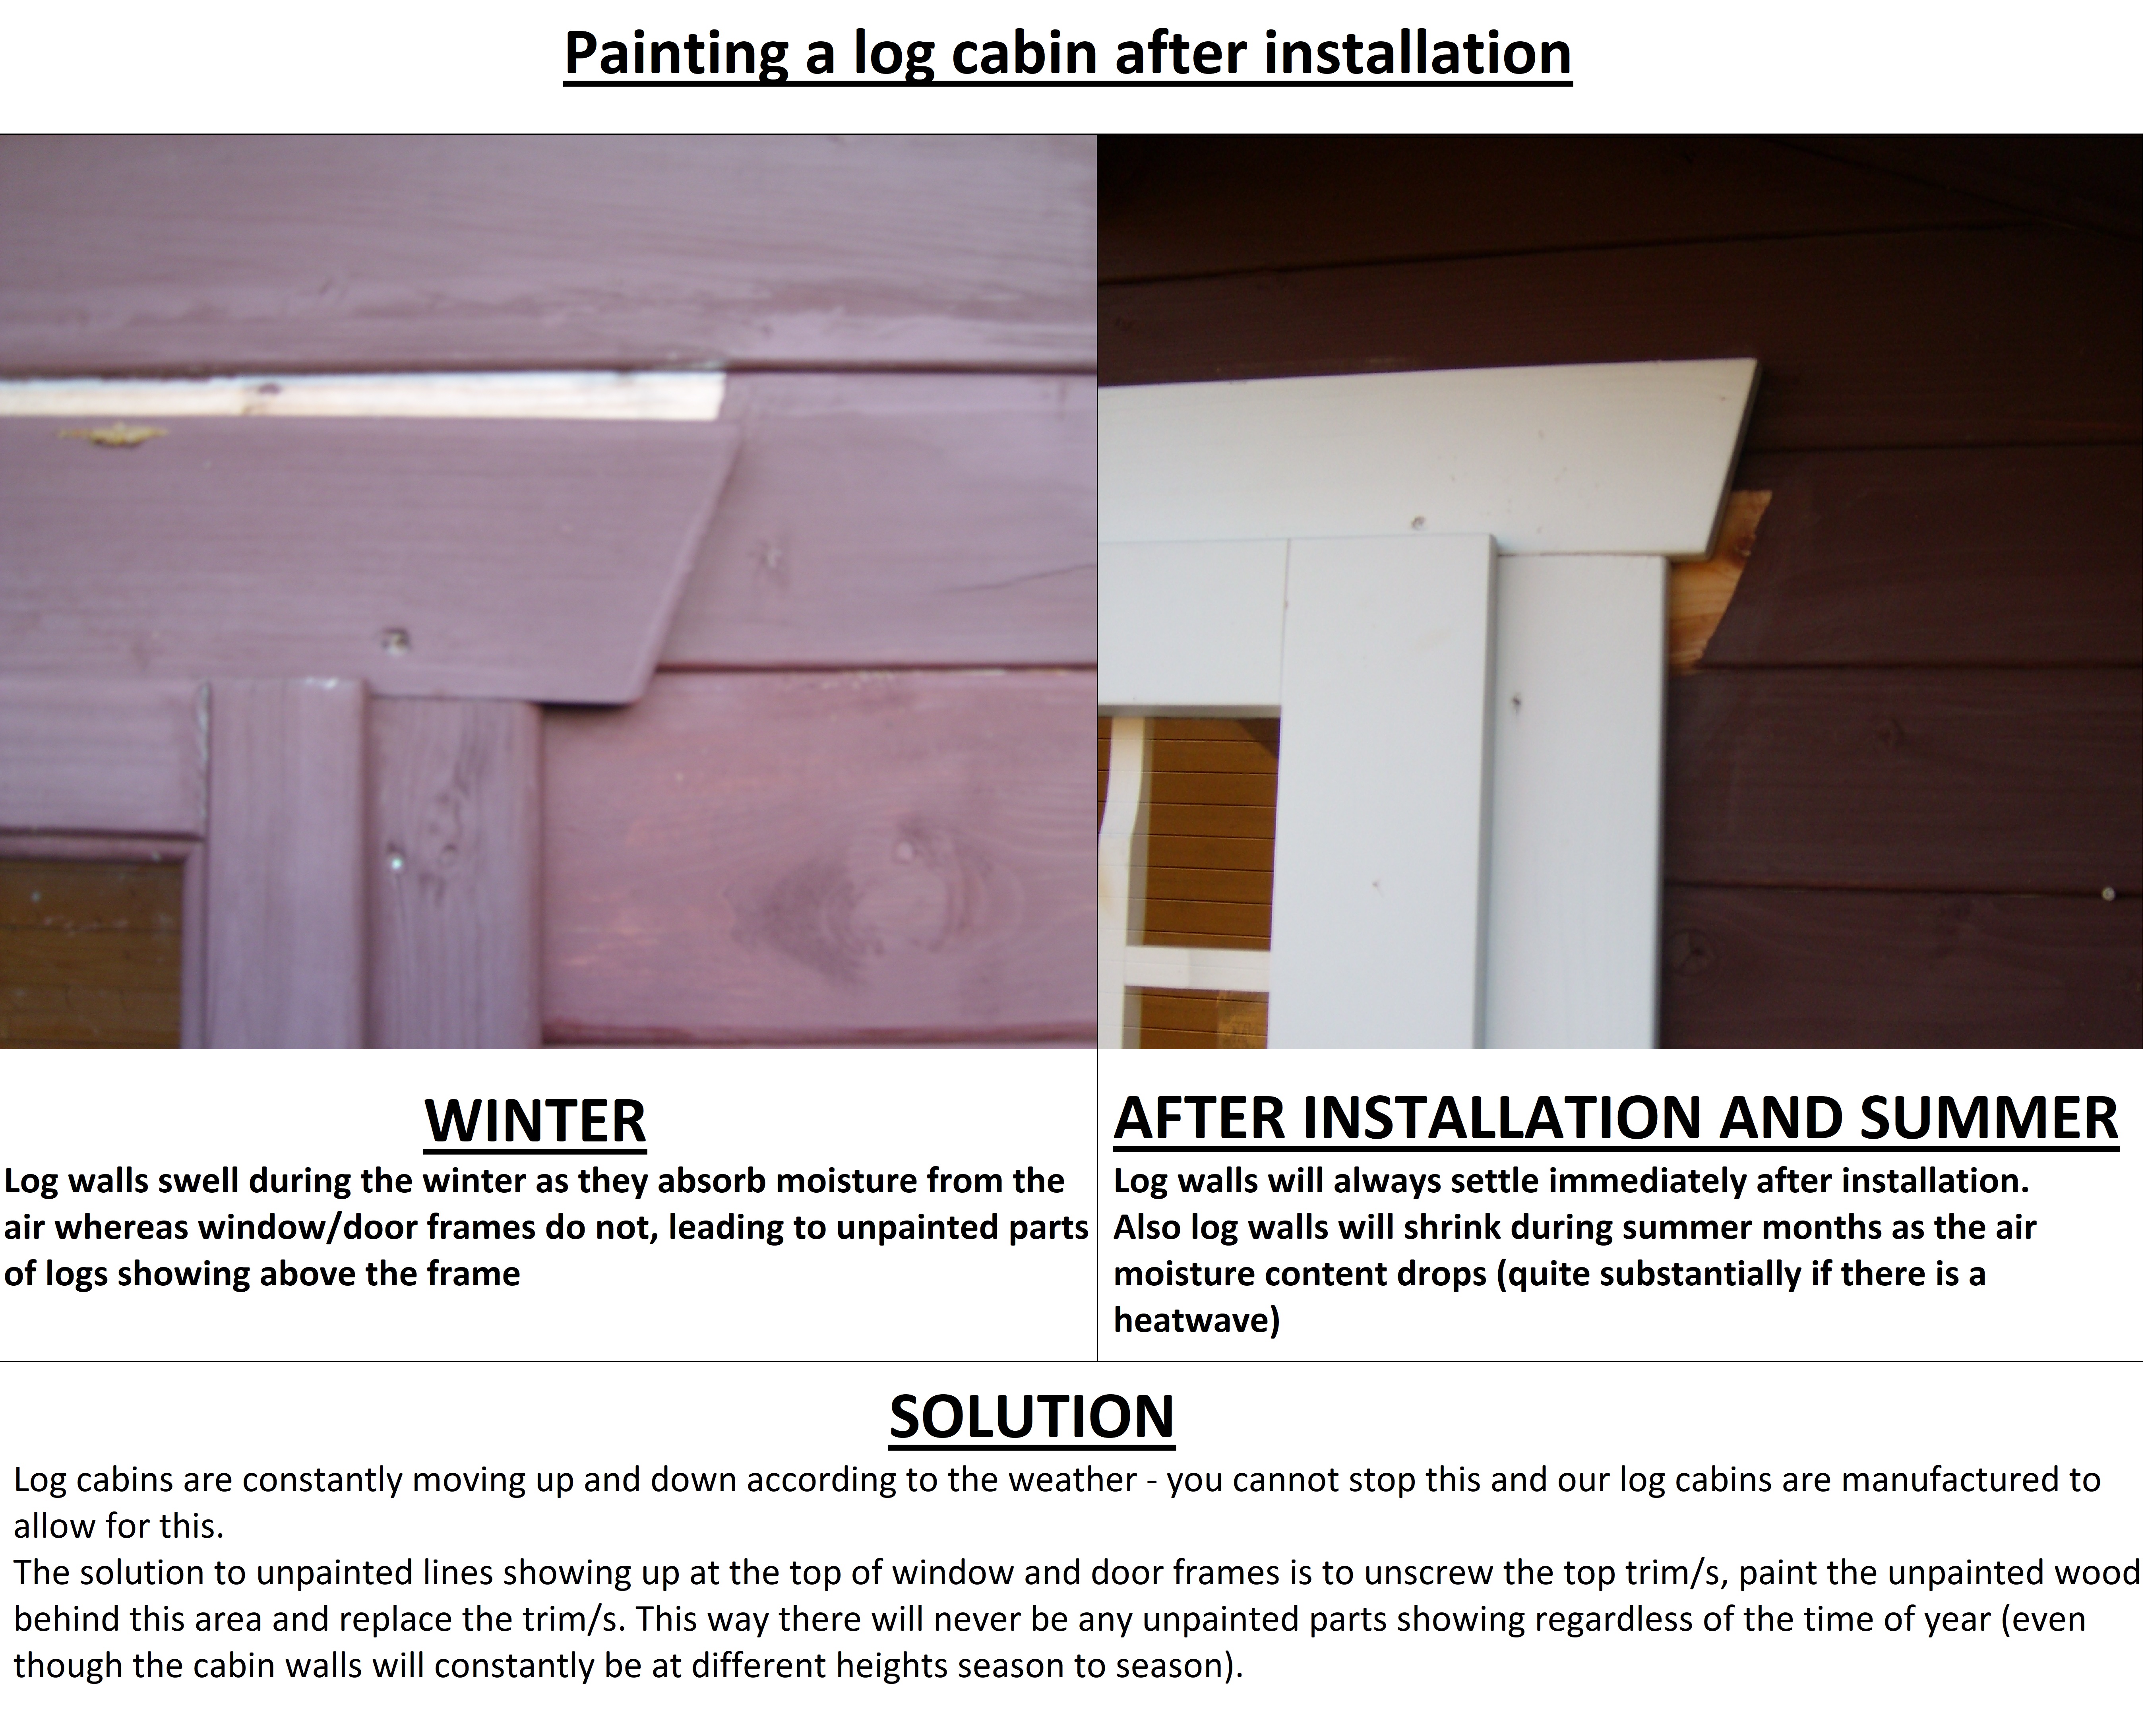 Painting a cabin after installation